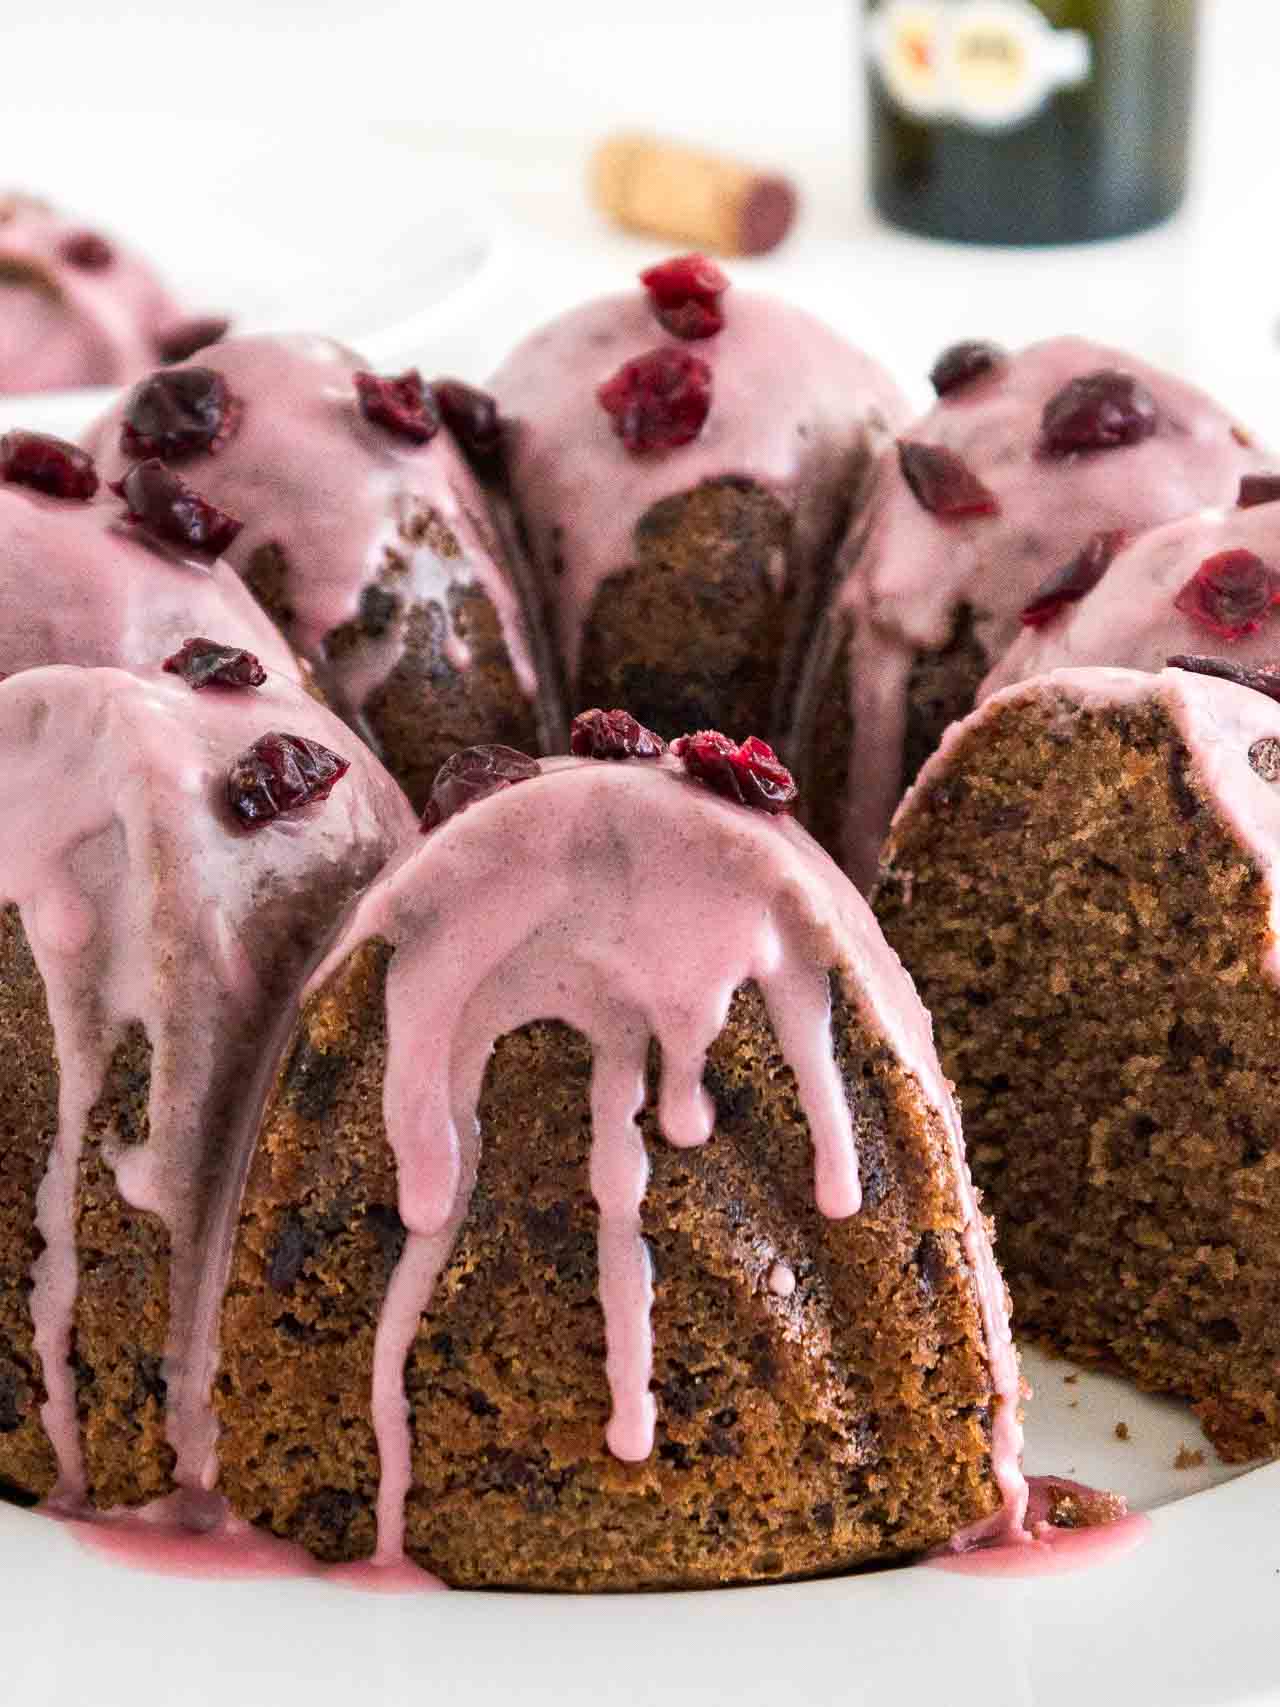 Close-up of a chocolate cranberry bundt cake with pink frosting, garnished with dried cranberries on a white plate. A piece of the cake has been cut out.